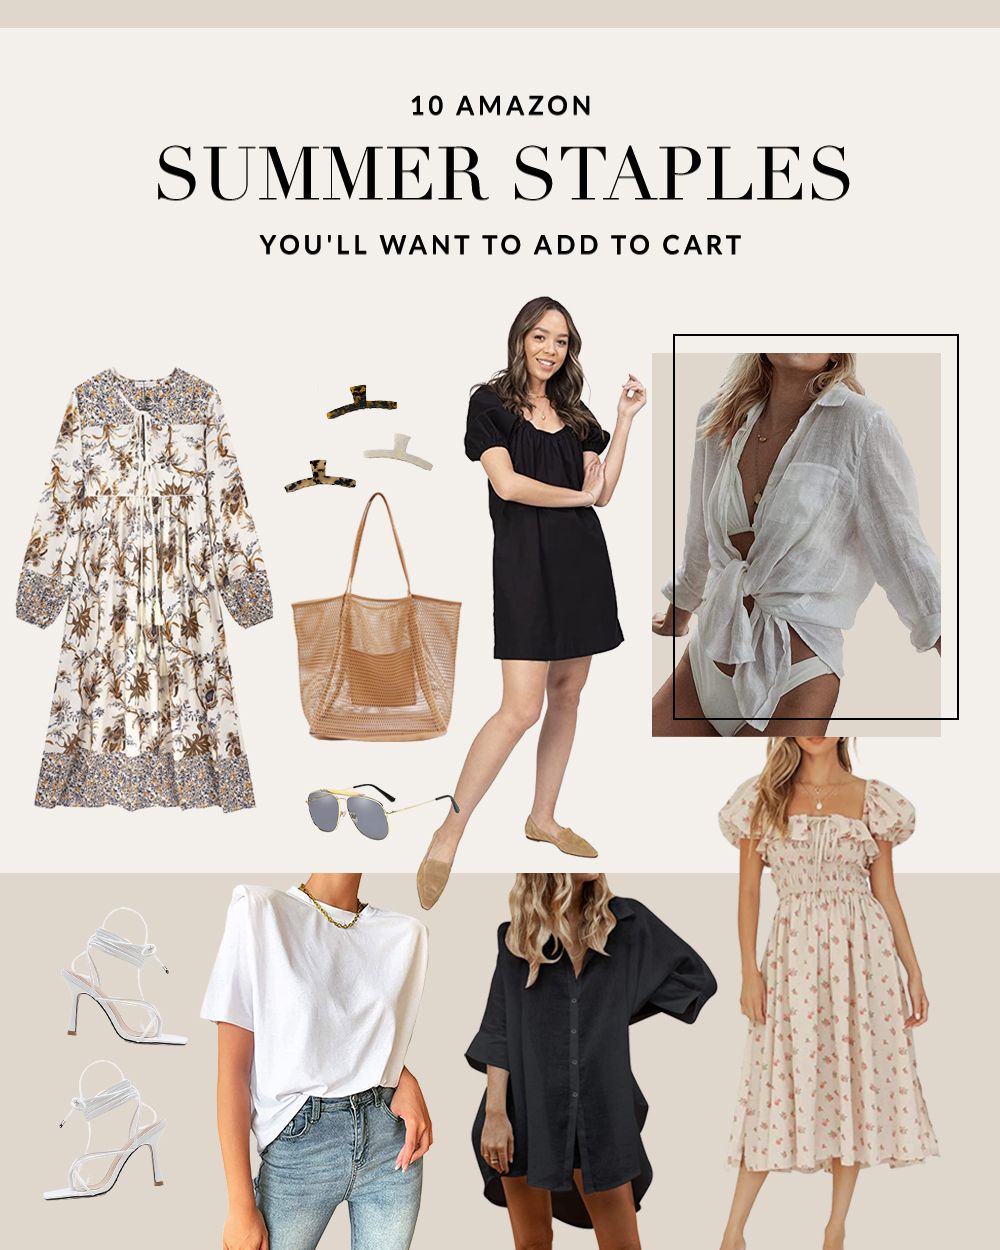 10 Amazon Summer Staples You'll Want To Add to Cart | The Teacher Diva ...